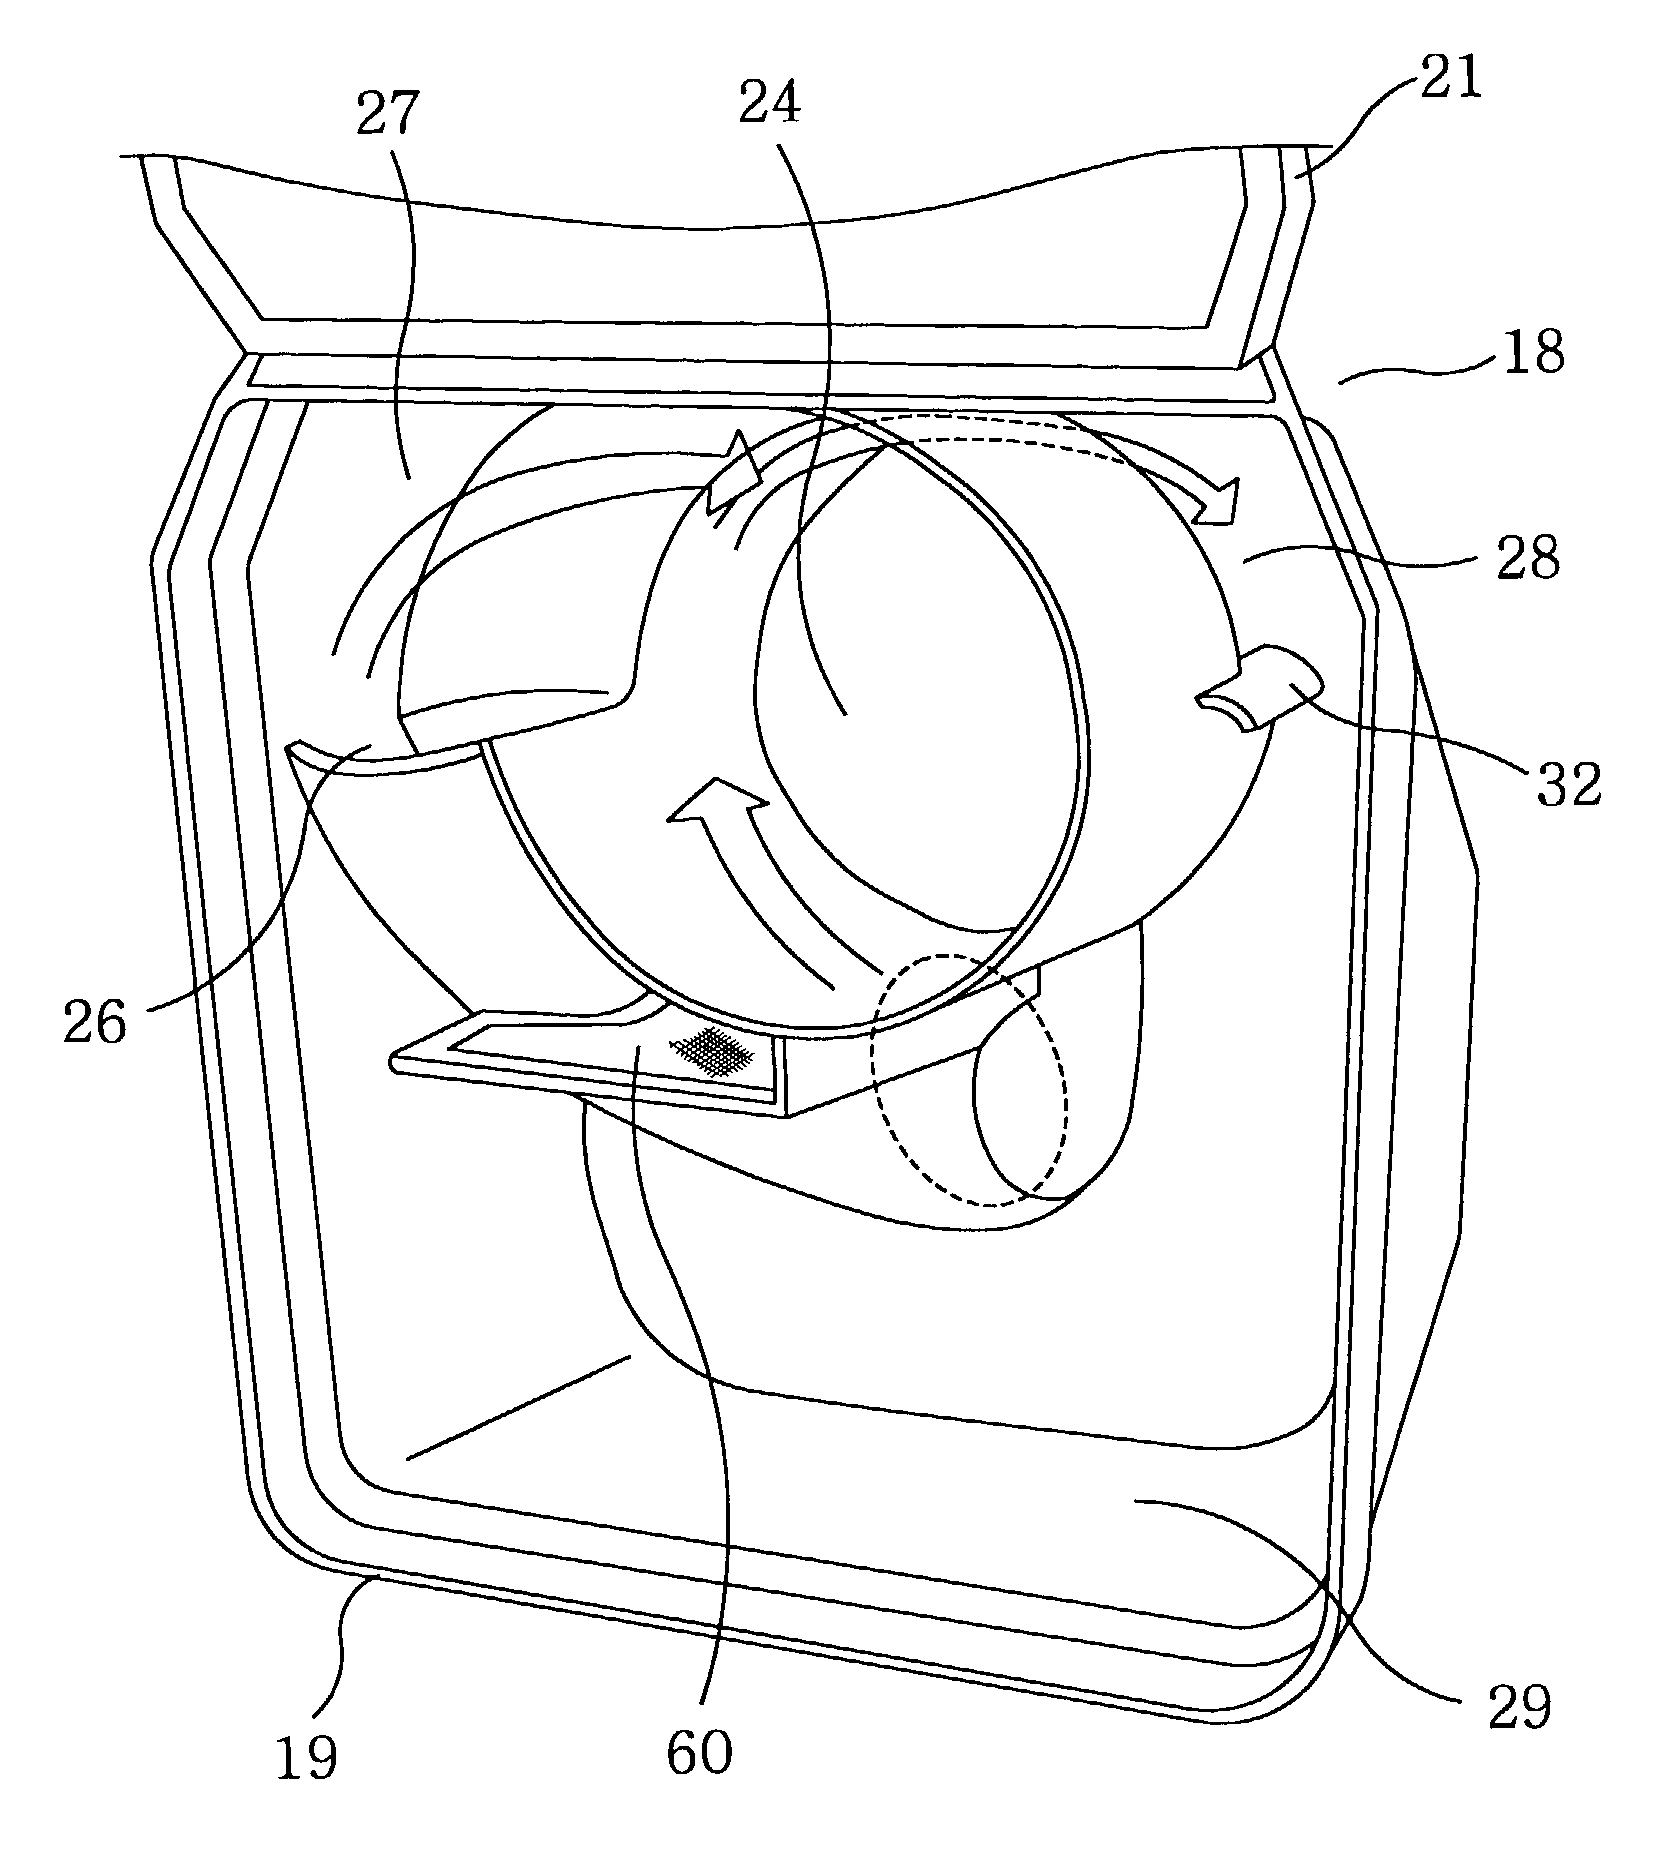 Vacuum cleaner capable of compressing dirt